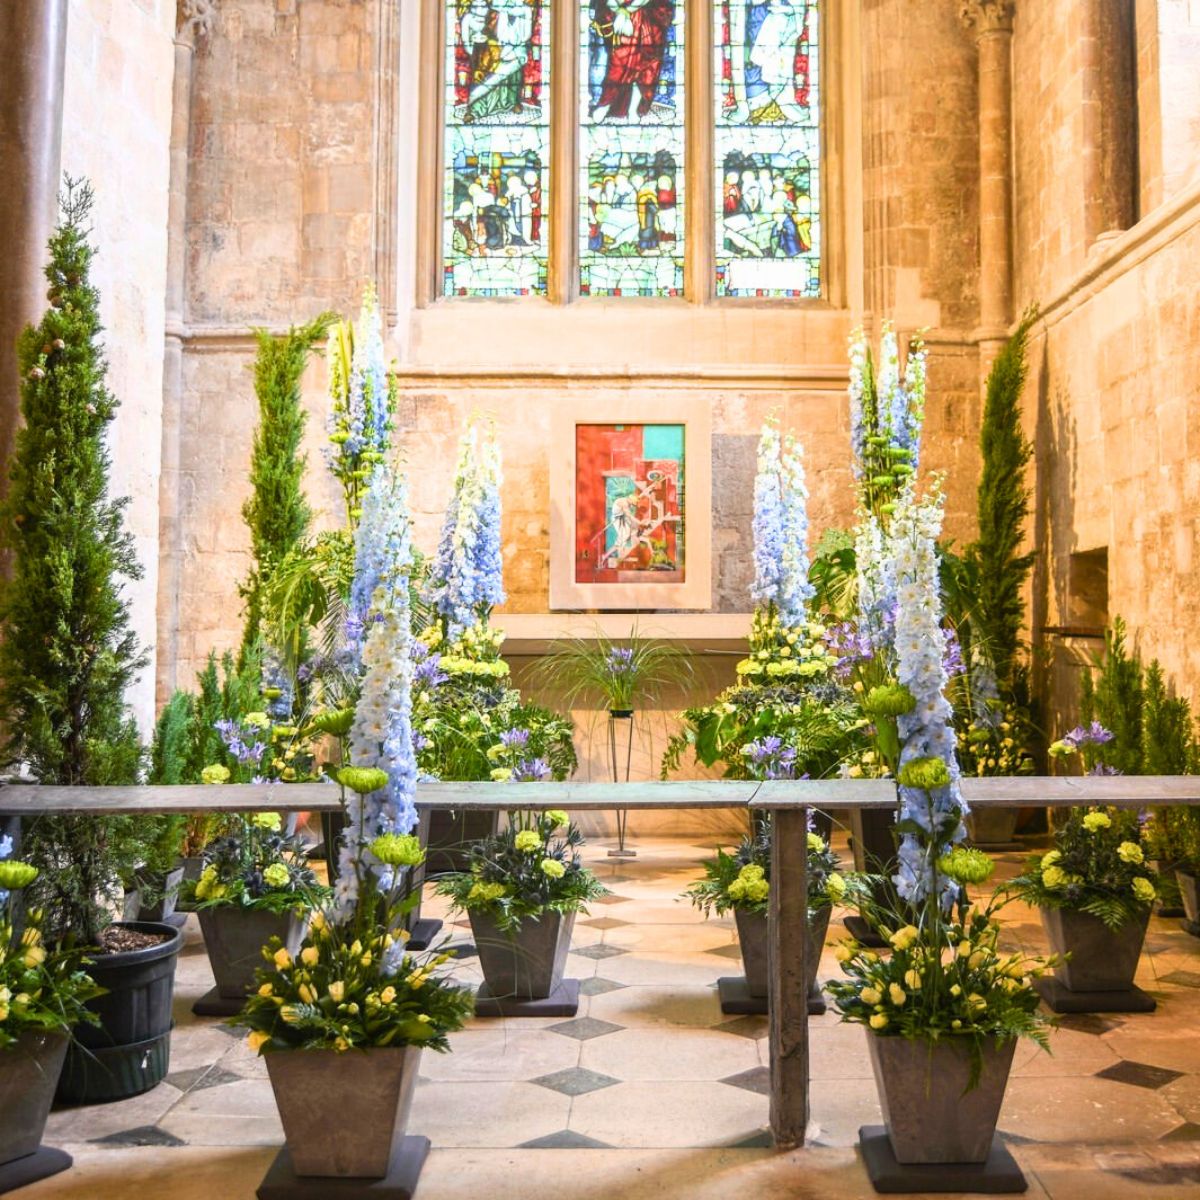 Floral displays adorning the Cathedral